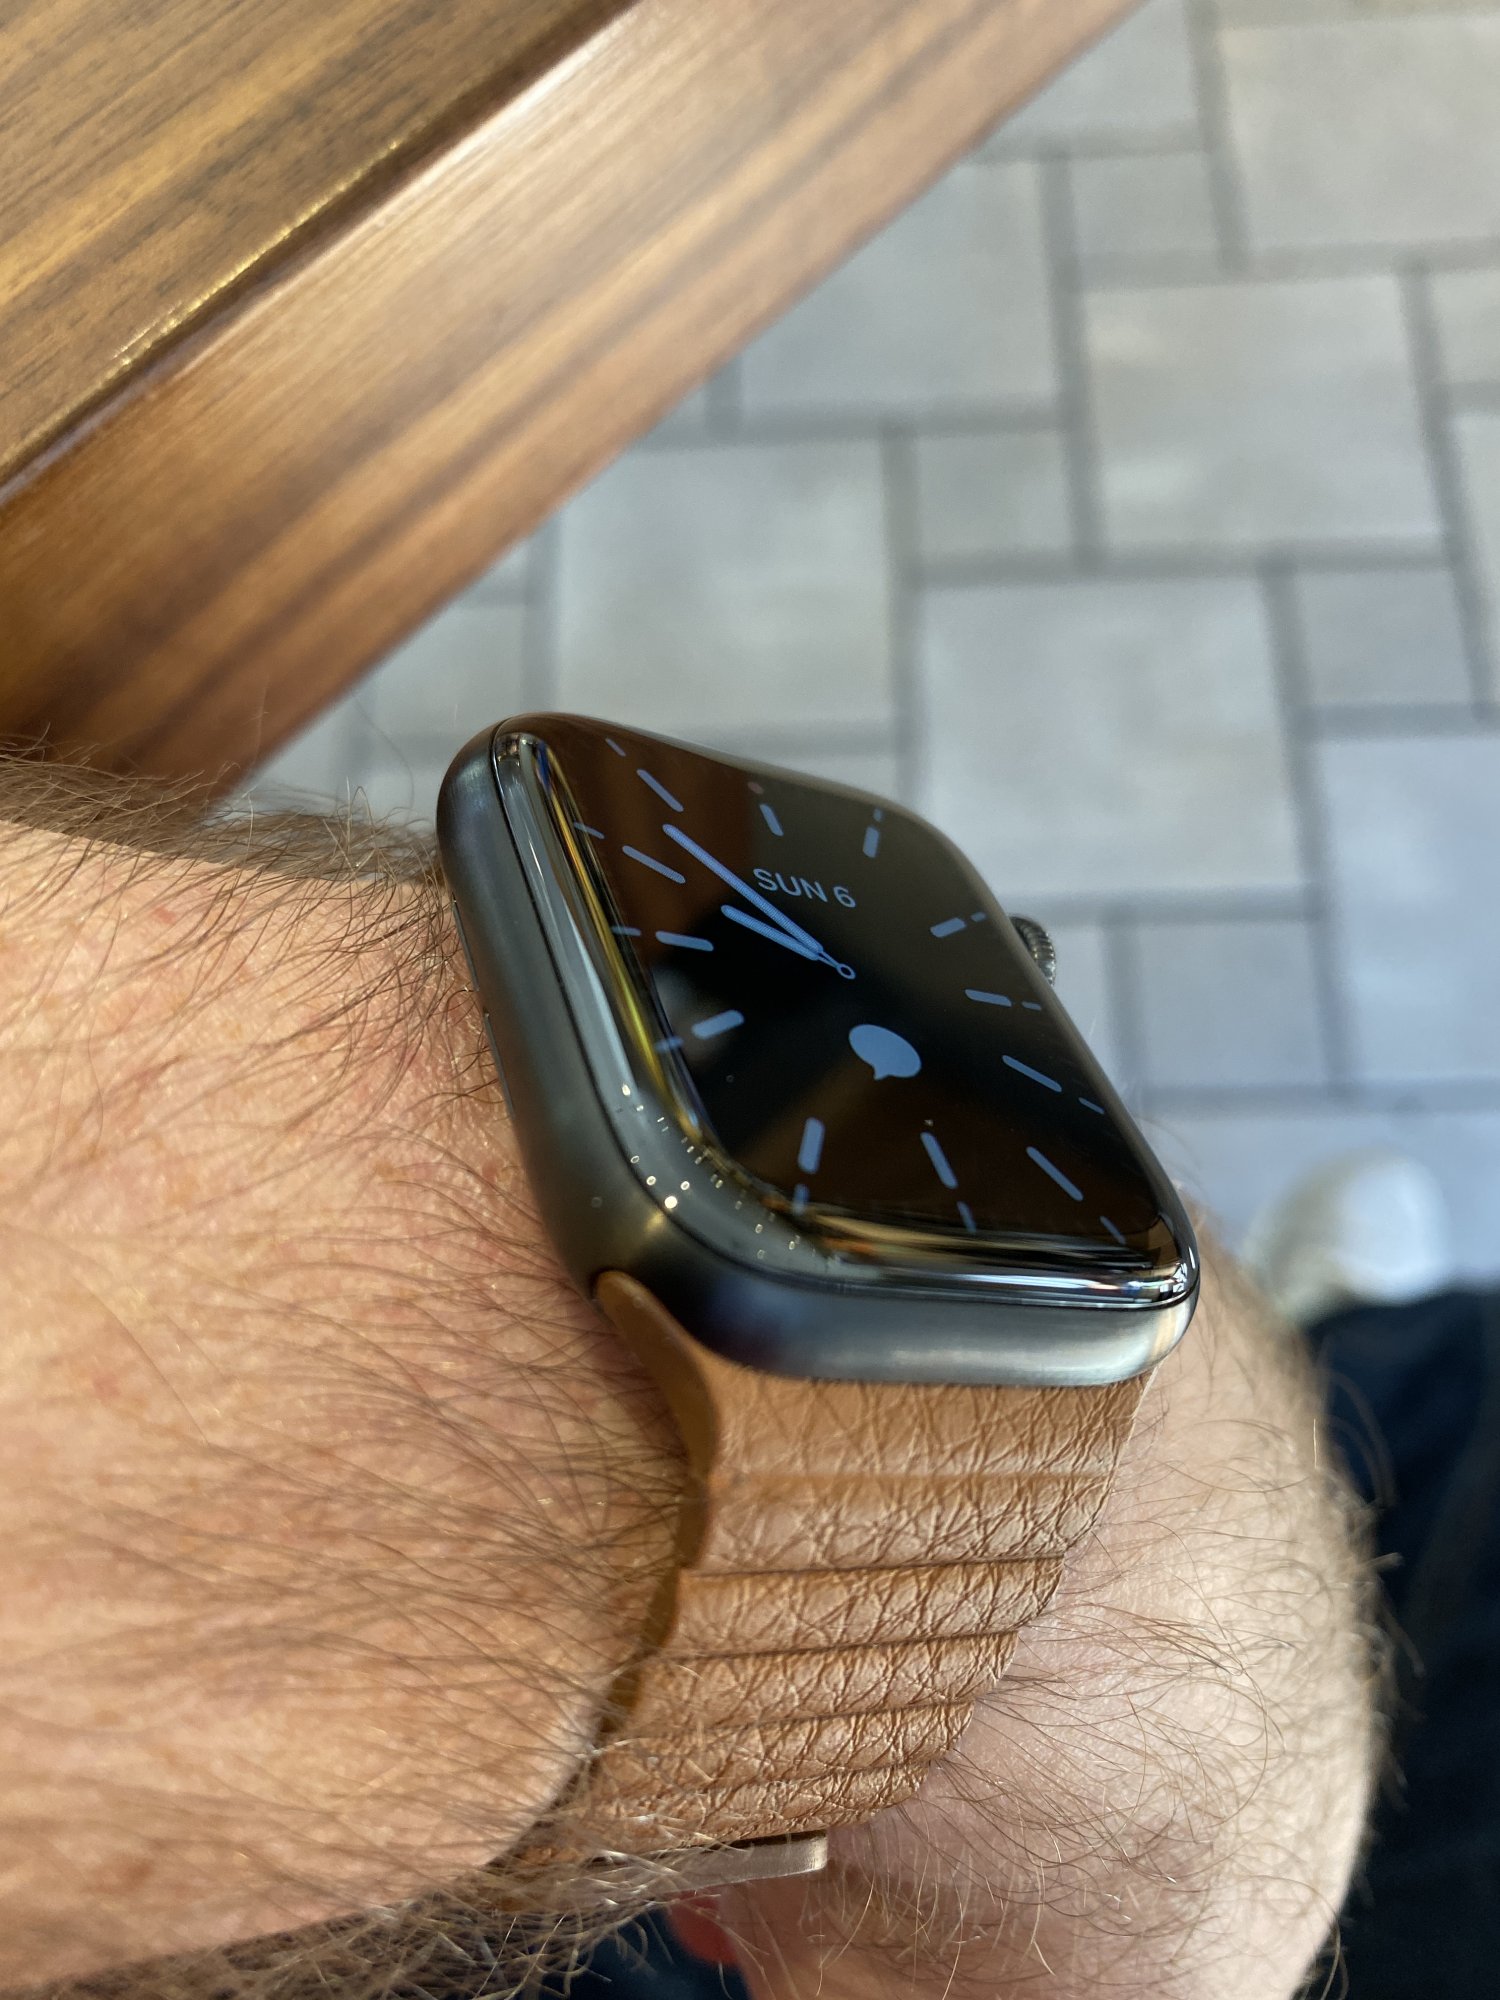 Show off your Apple Watch | Page 451 | MacRumors Forums